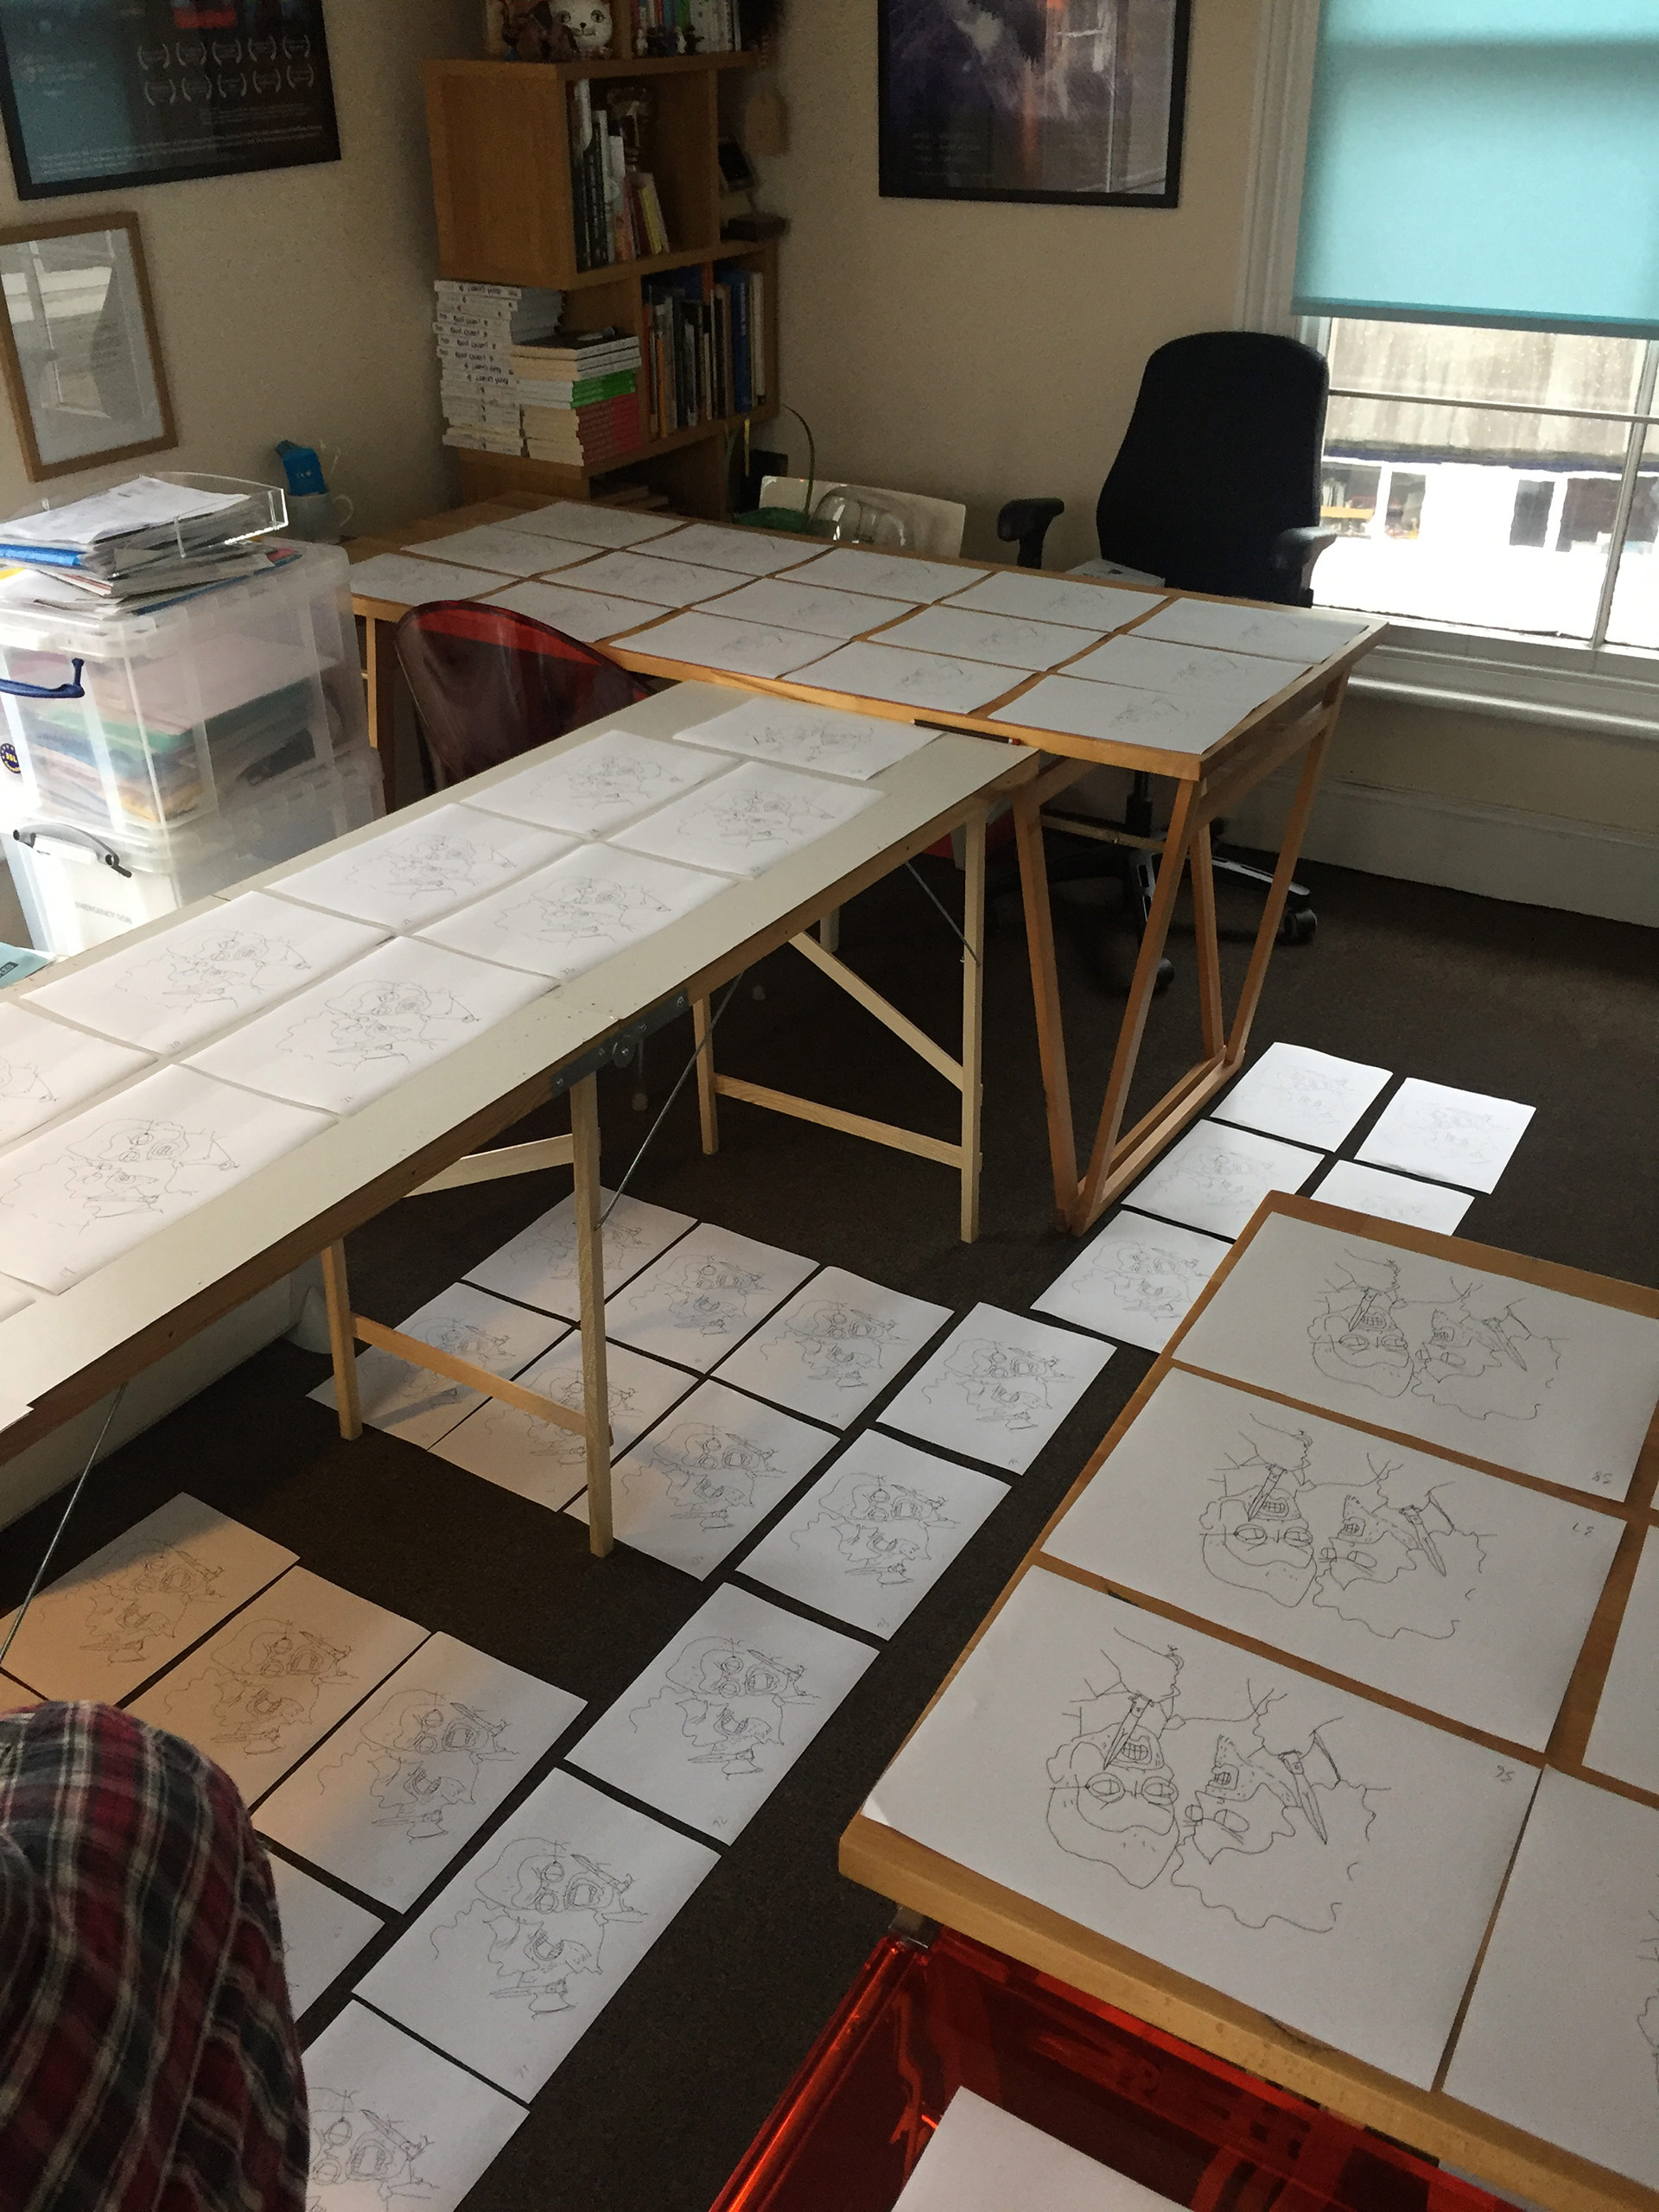 Animation drawings from "Marfa" lined up to be watercolored.